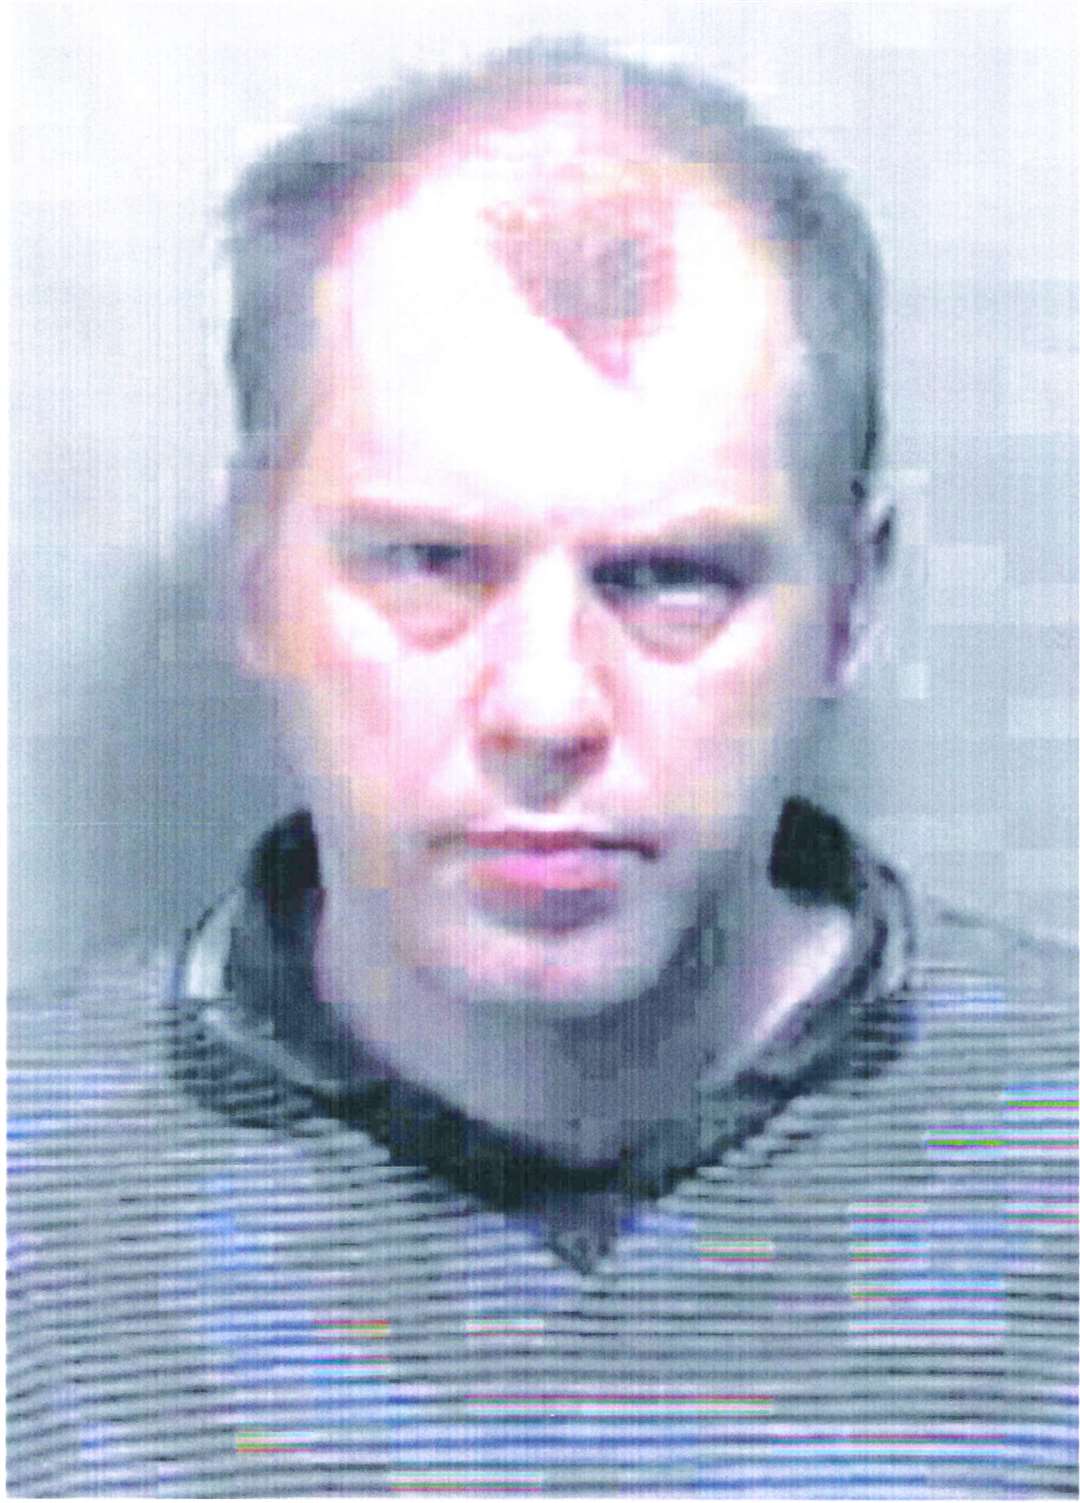 A police mugshot of Michael Stone from 1998